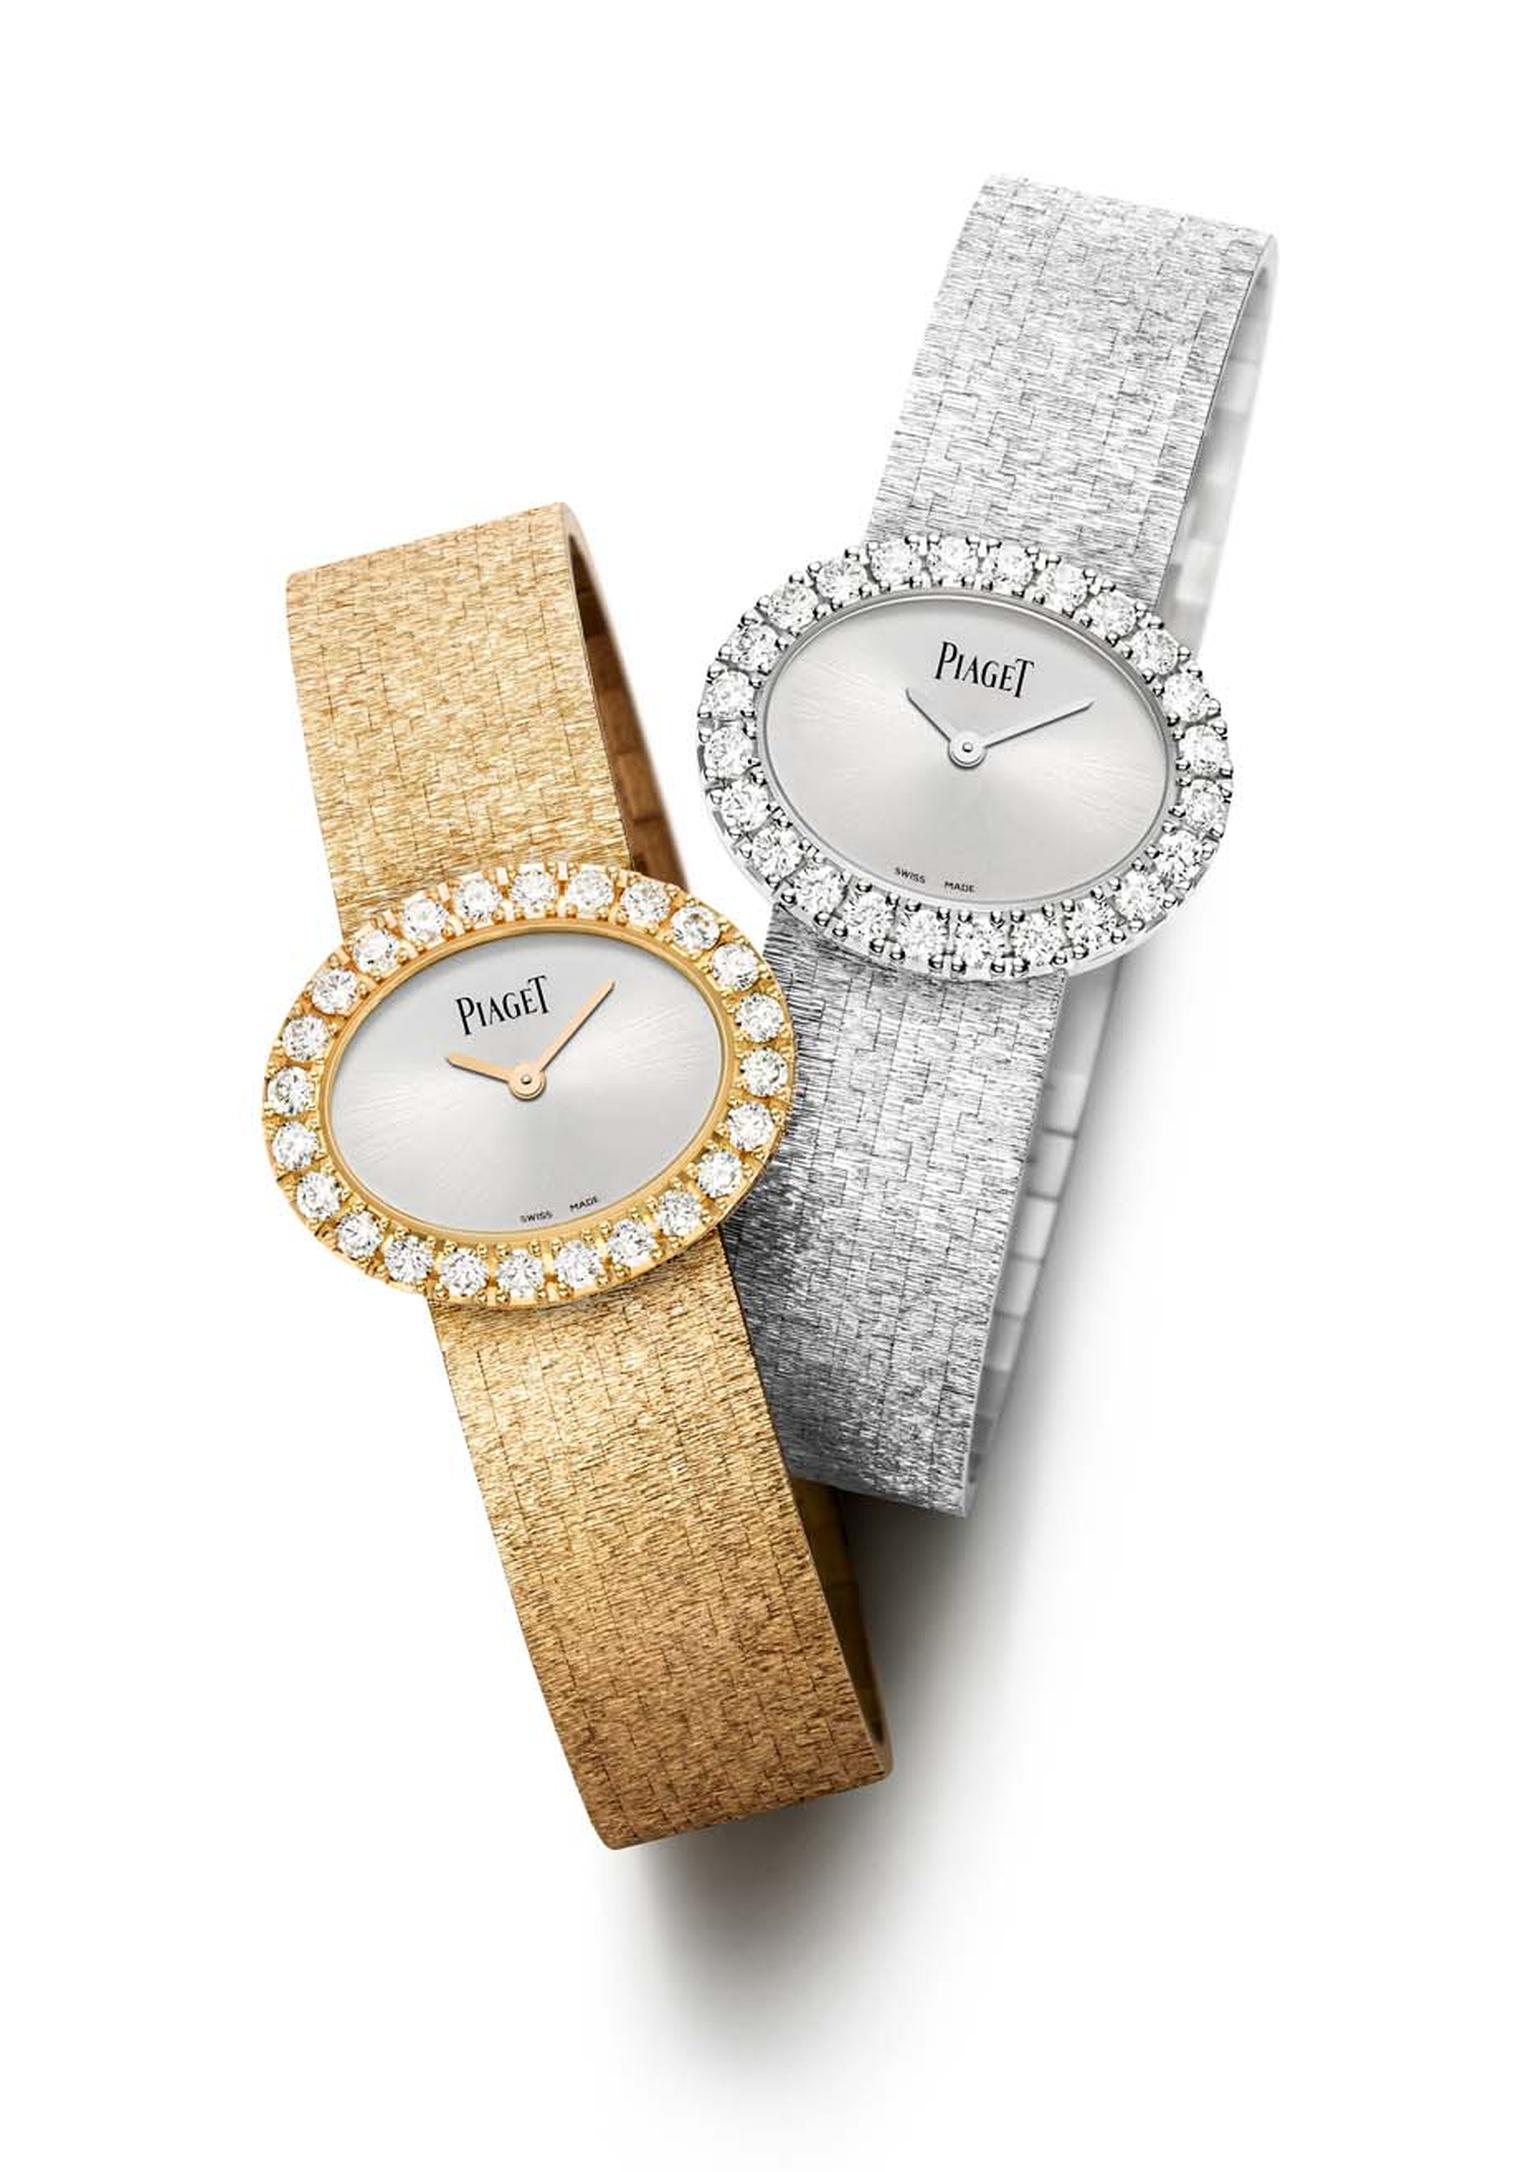 Two months before the official launch at SIHH, Piaget has decided to share two of its stars for 2015. Hailed as the return of “vintage icon watches”, Piaget has taken a trip down memory lane with the re-edit two famous pieces from the 1960s and 70s, inclu